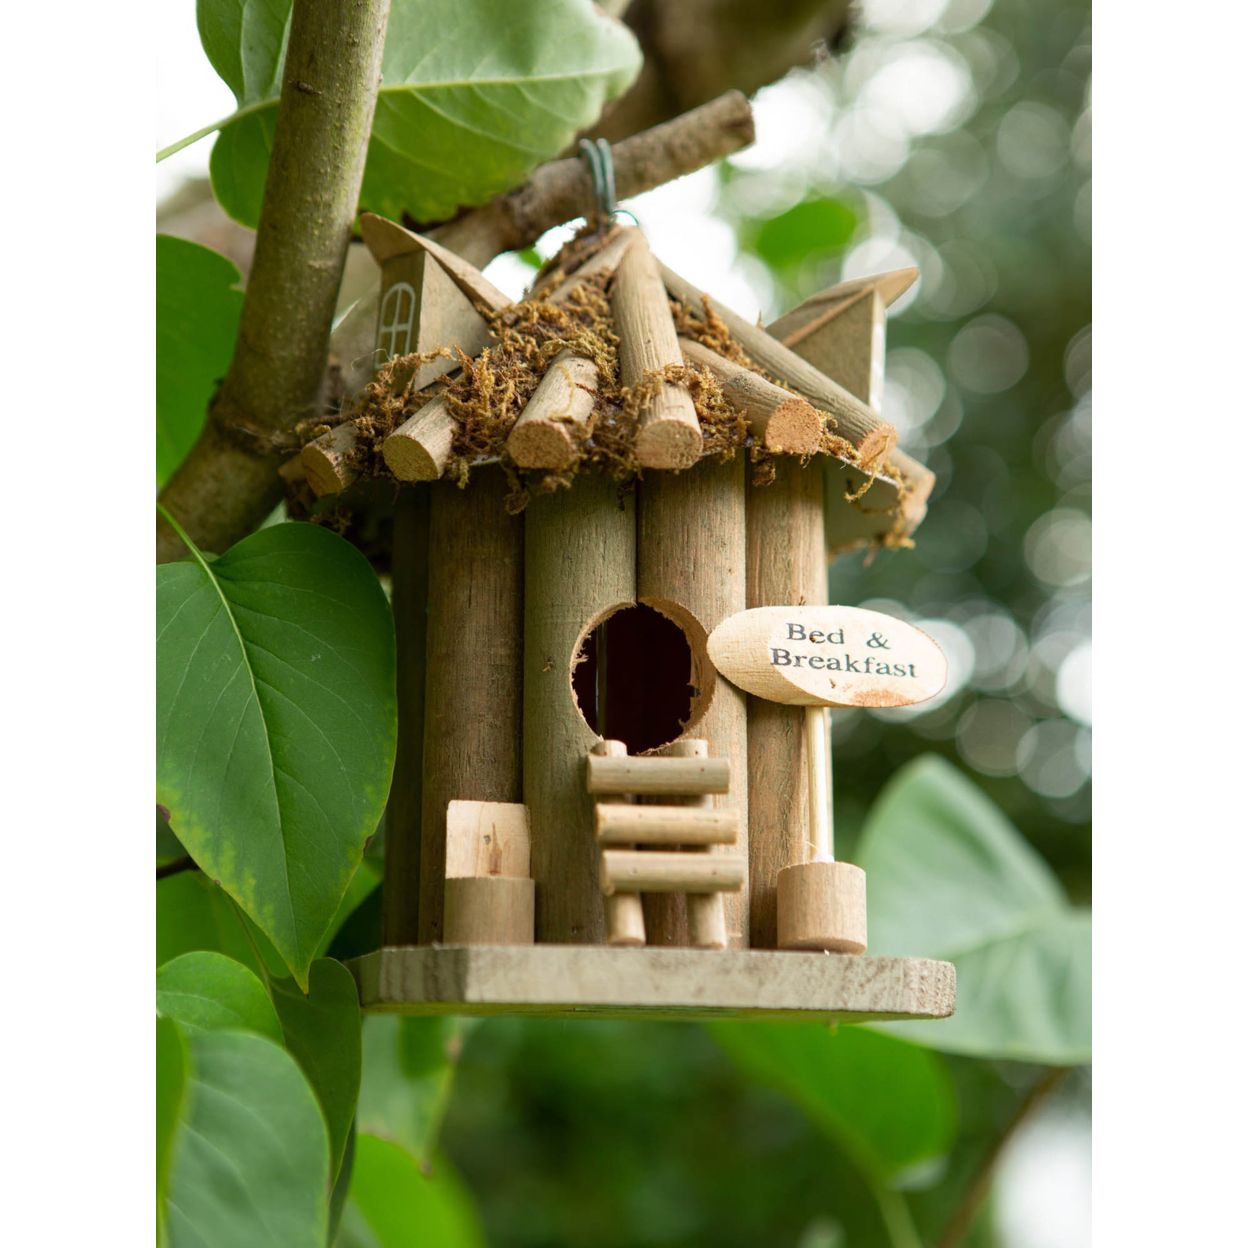 Home Decorative Bed And Breakfast Wood Birdhouse - Brown - image 2 of 5